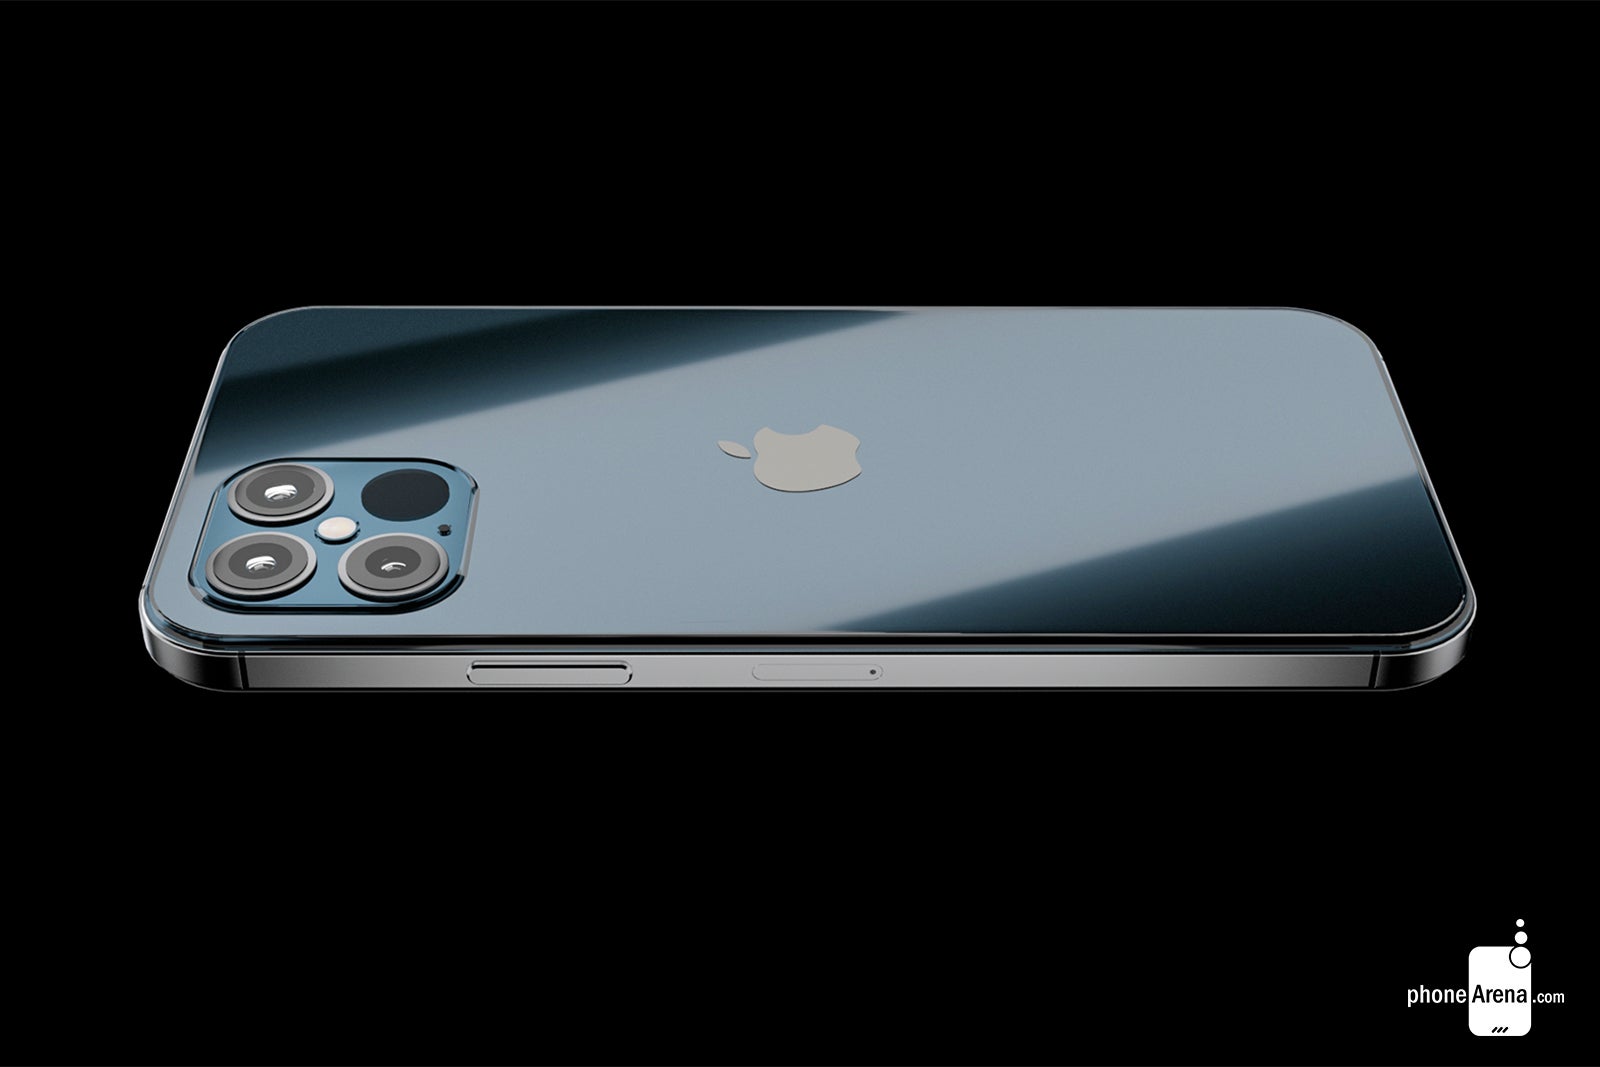 Apple iPhone 12 Pro concept render - Apple to ship 5G iPhone 12 in 'exquisite' thinner box made possible by lack of accessories